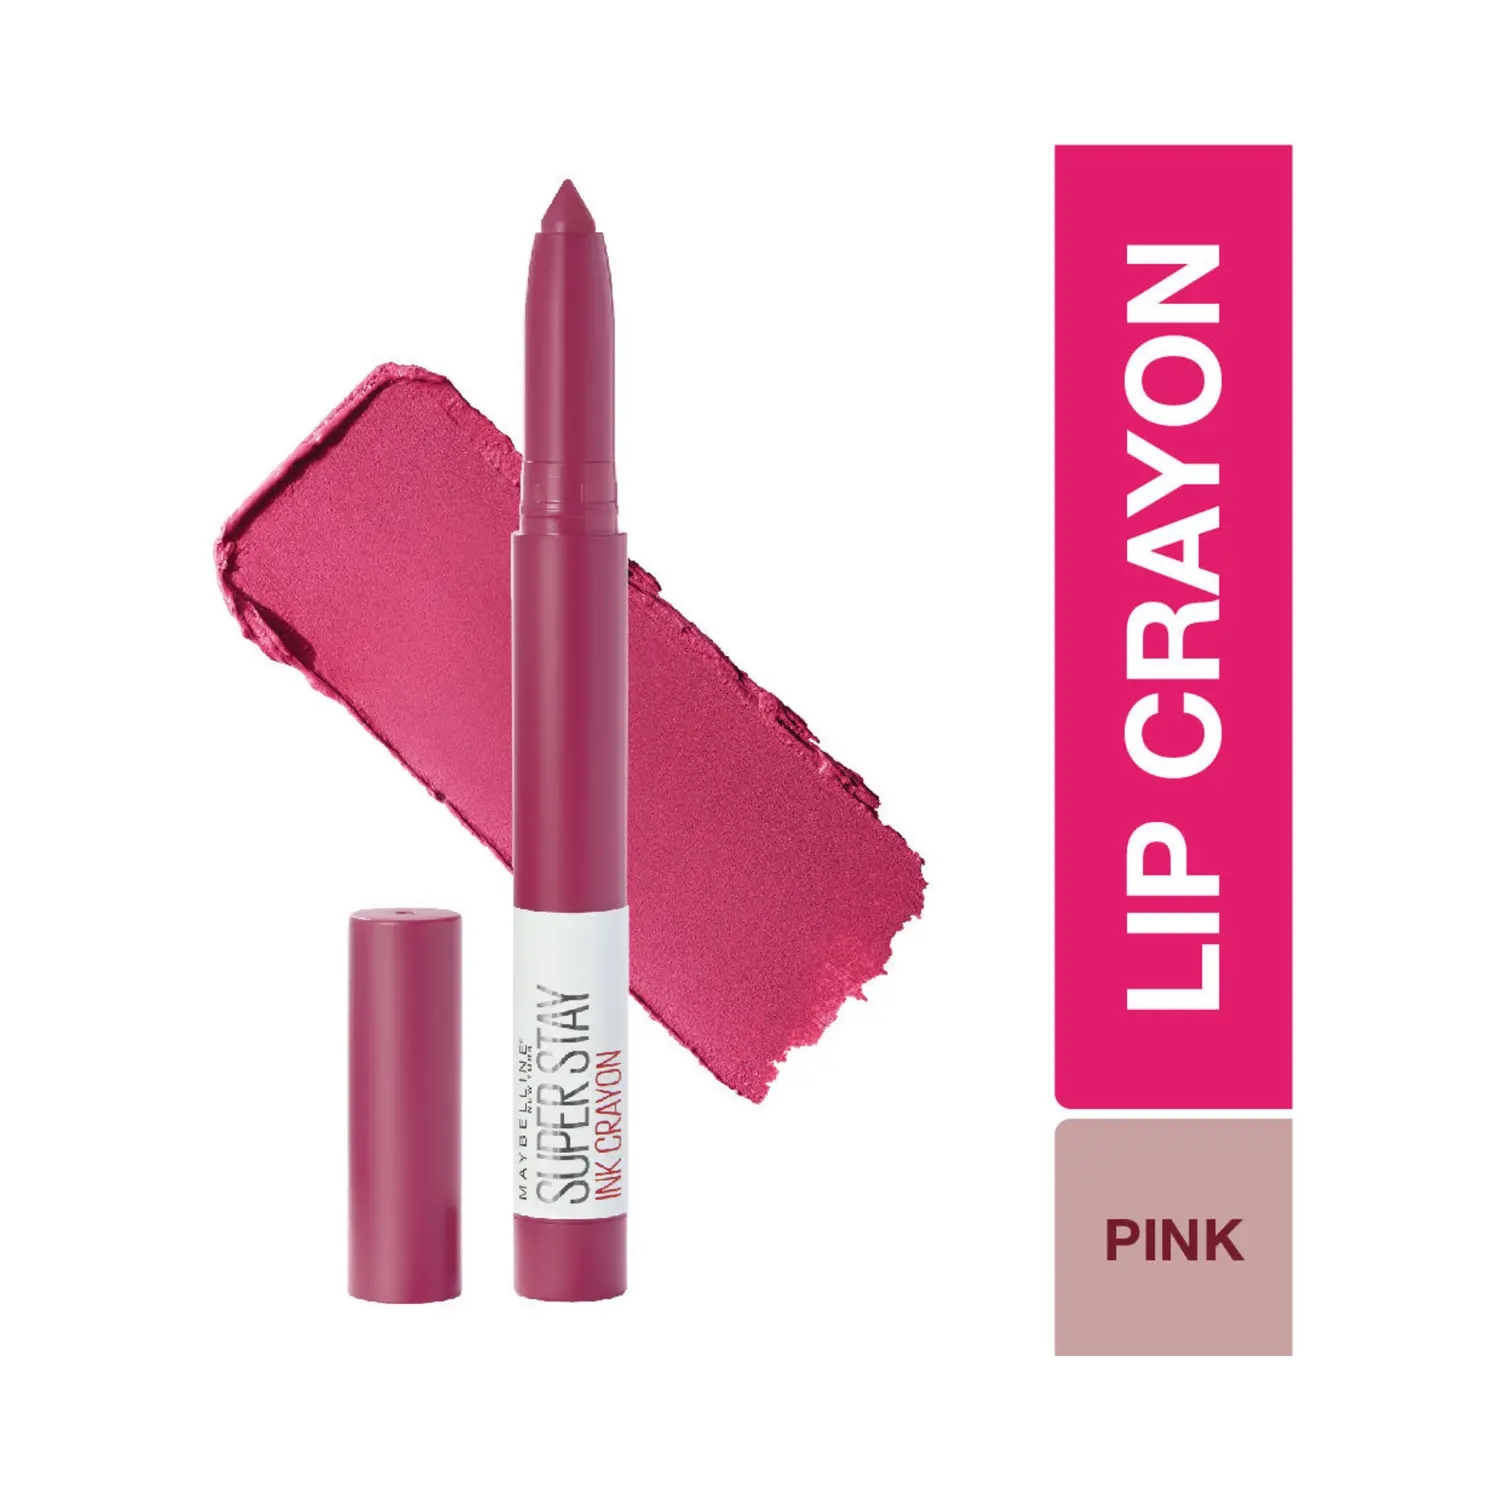 Maybelline New York | Maybelline New York Super Stay Ink Crayon Lipstick - 35 Treat Yourself (1.2g)